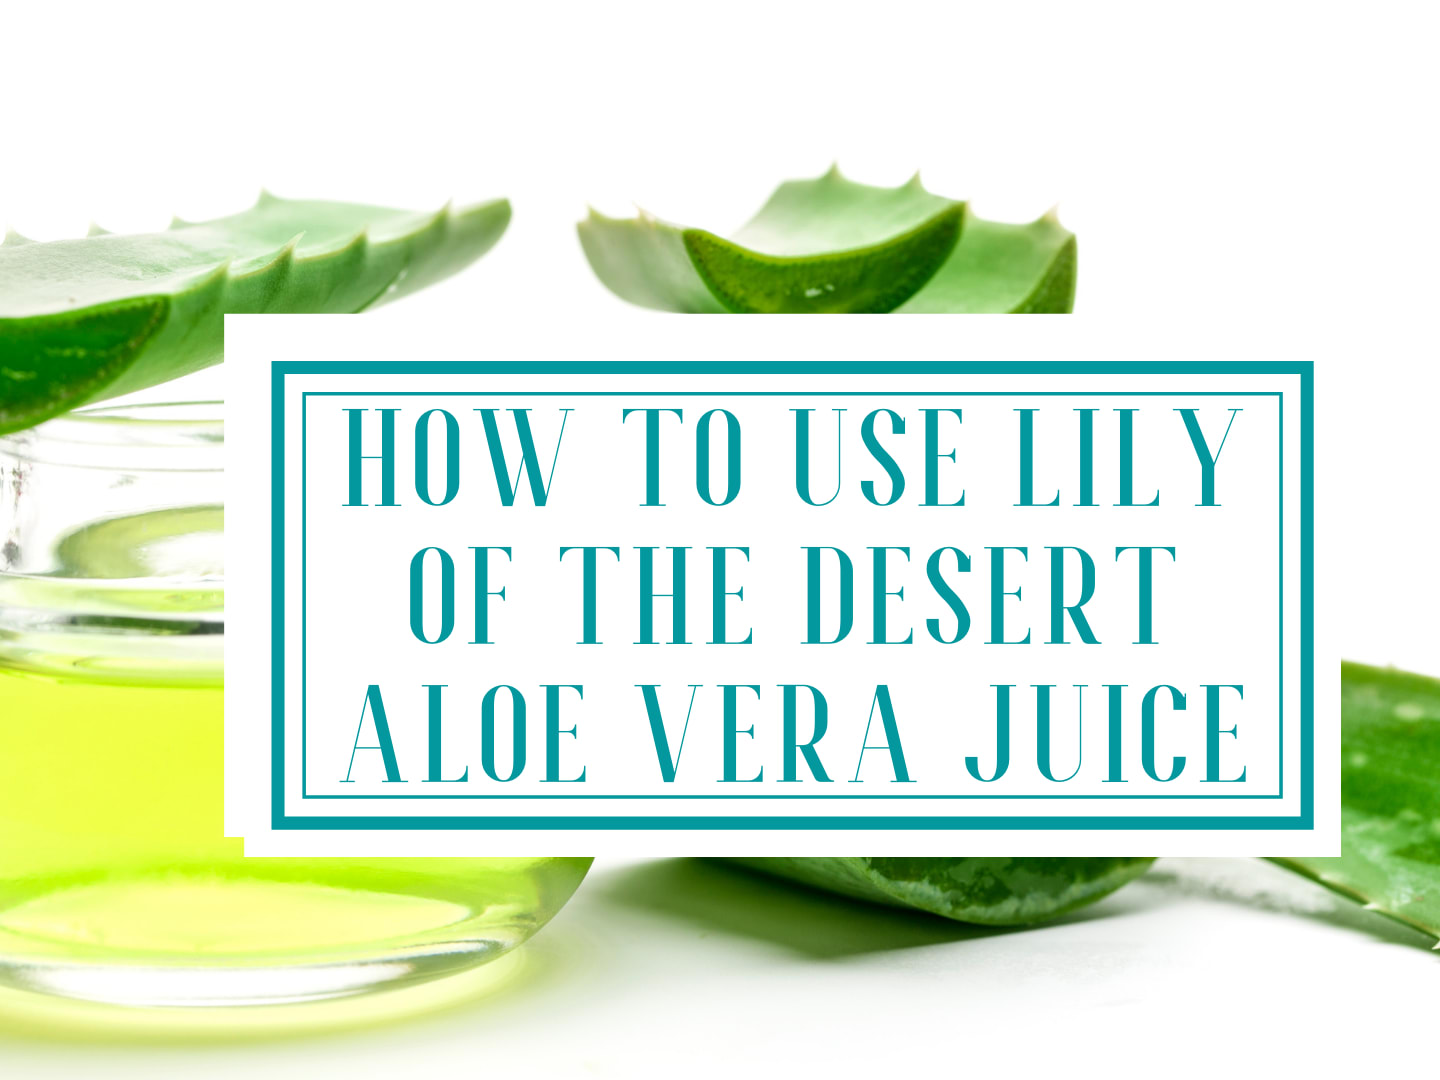 Lily of the Desert Aloe Vera Juice for Hair